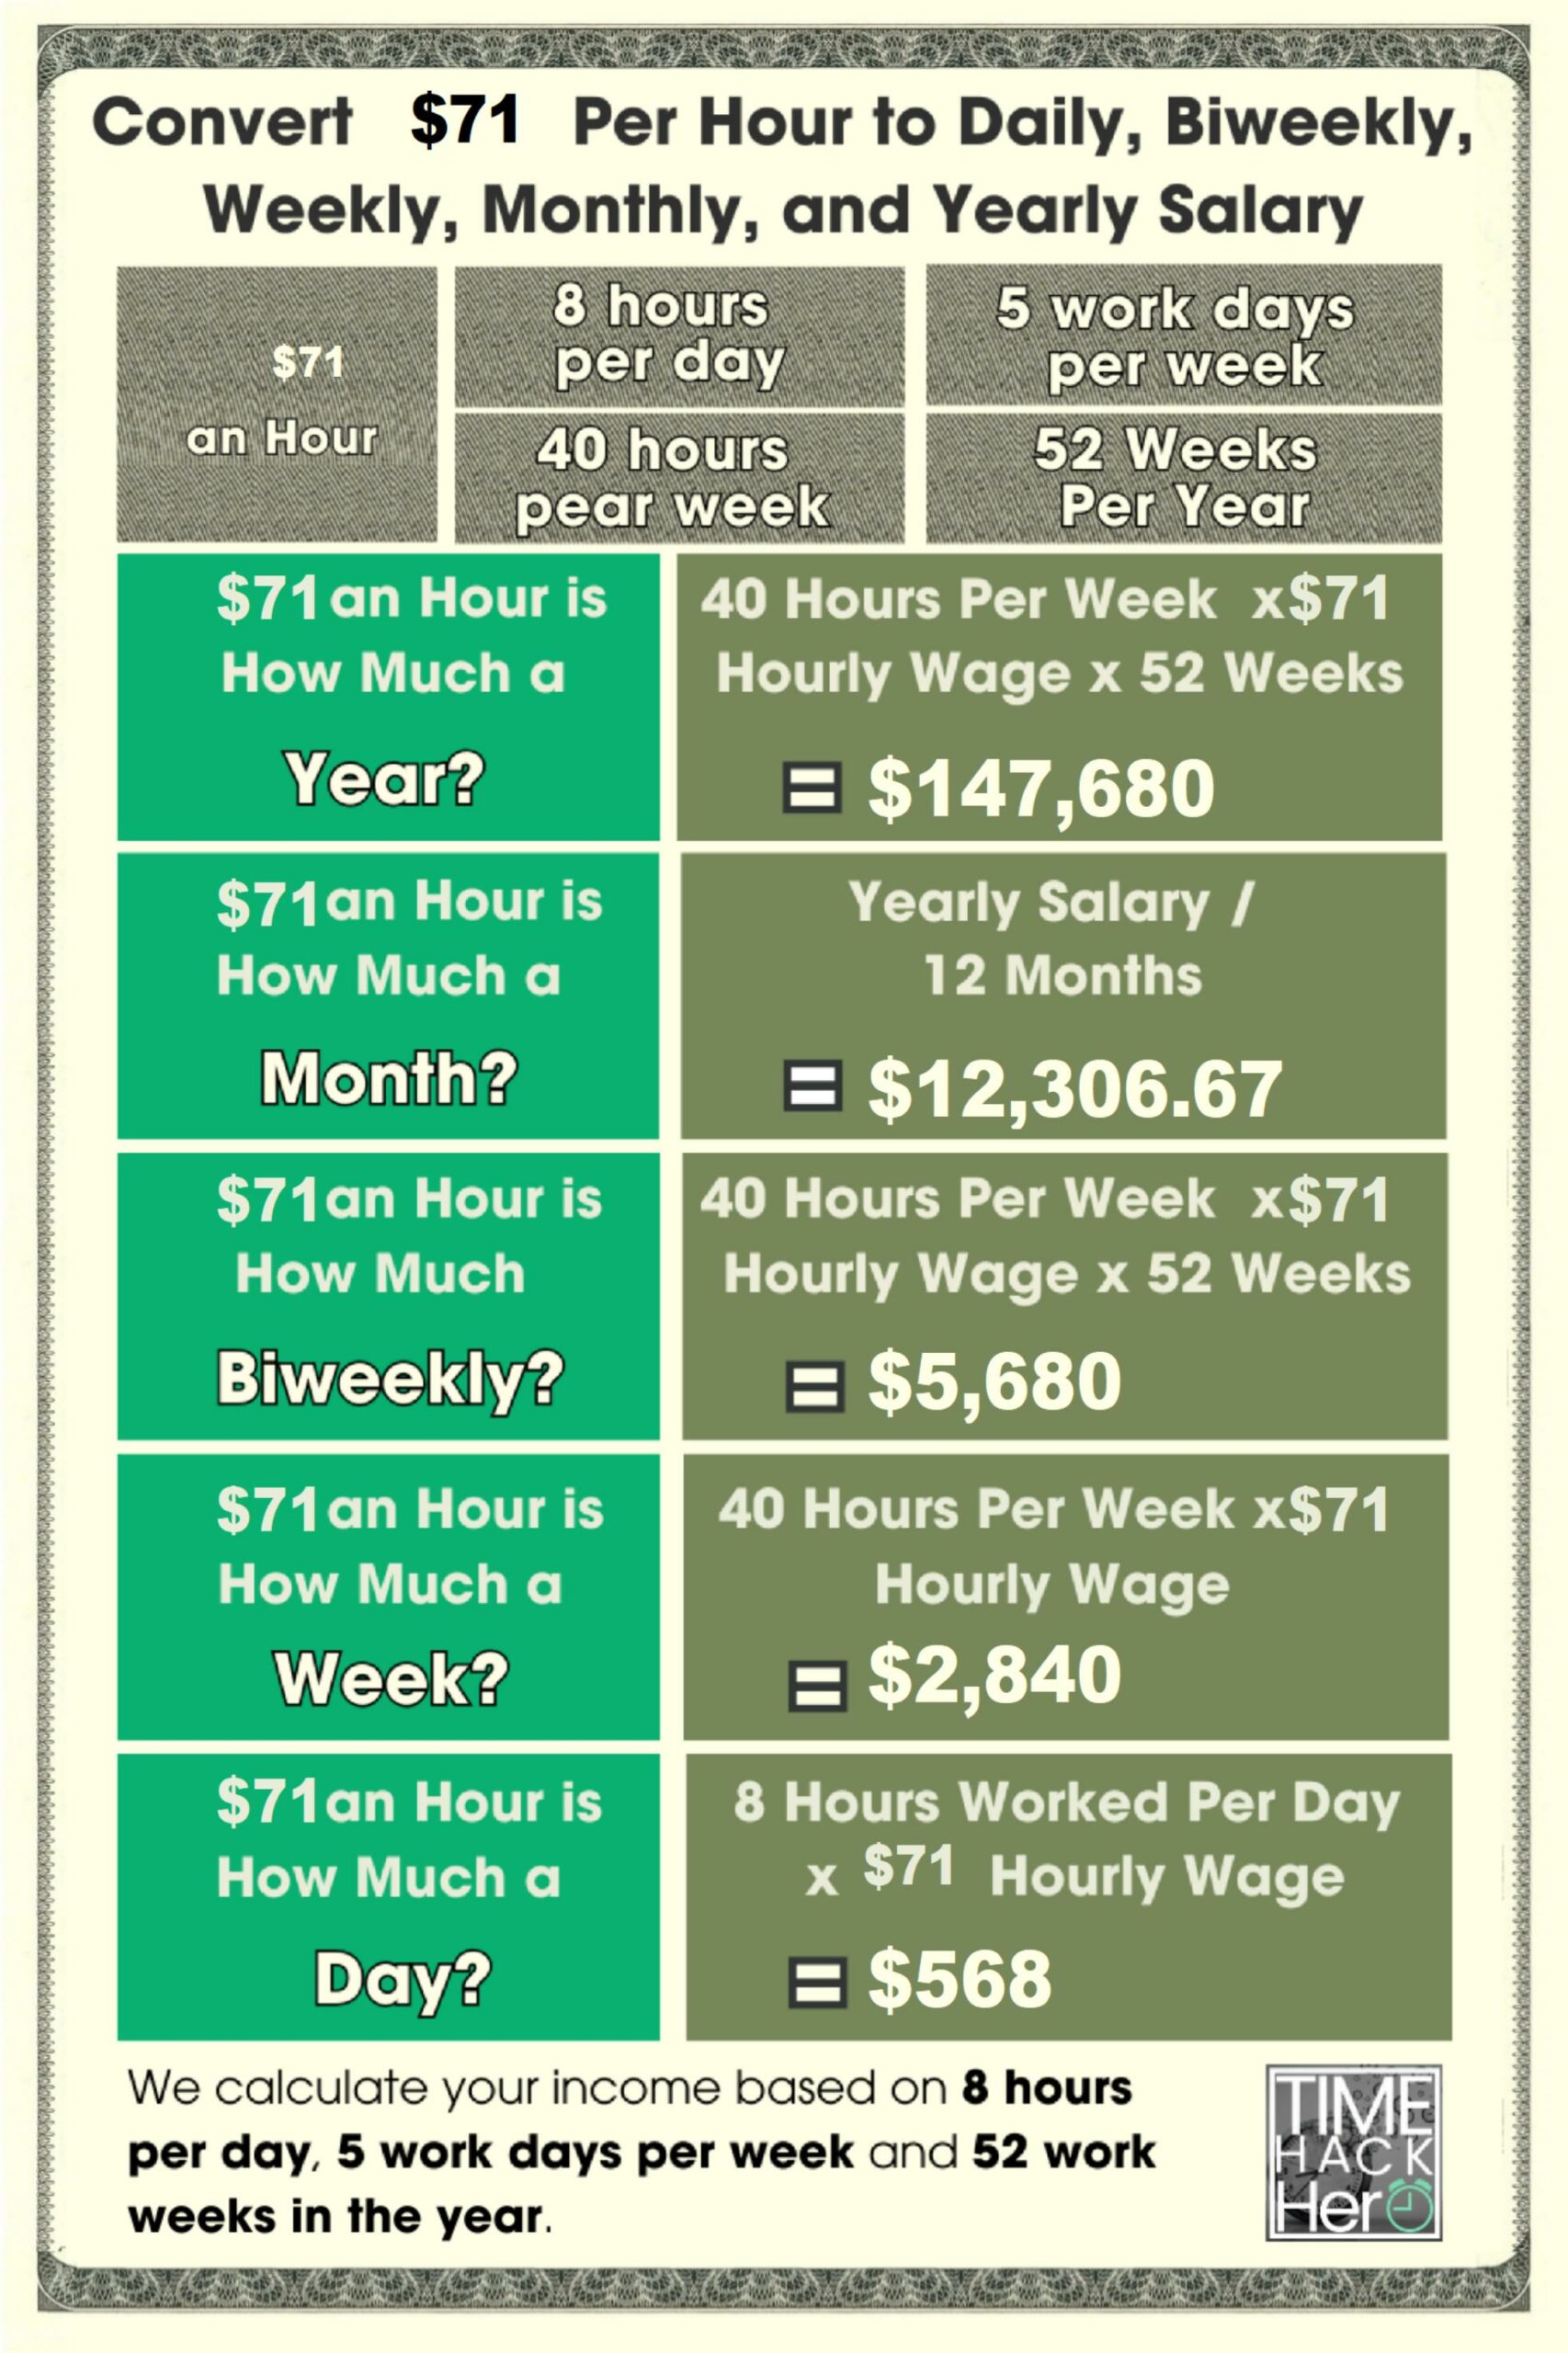 Convert $71 Per Hour to Weekly, Monthly, and Yearly Salary